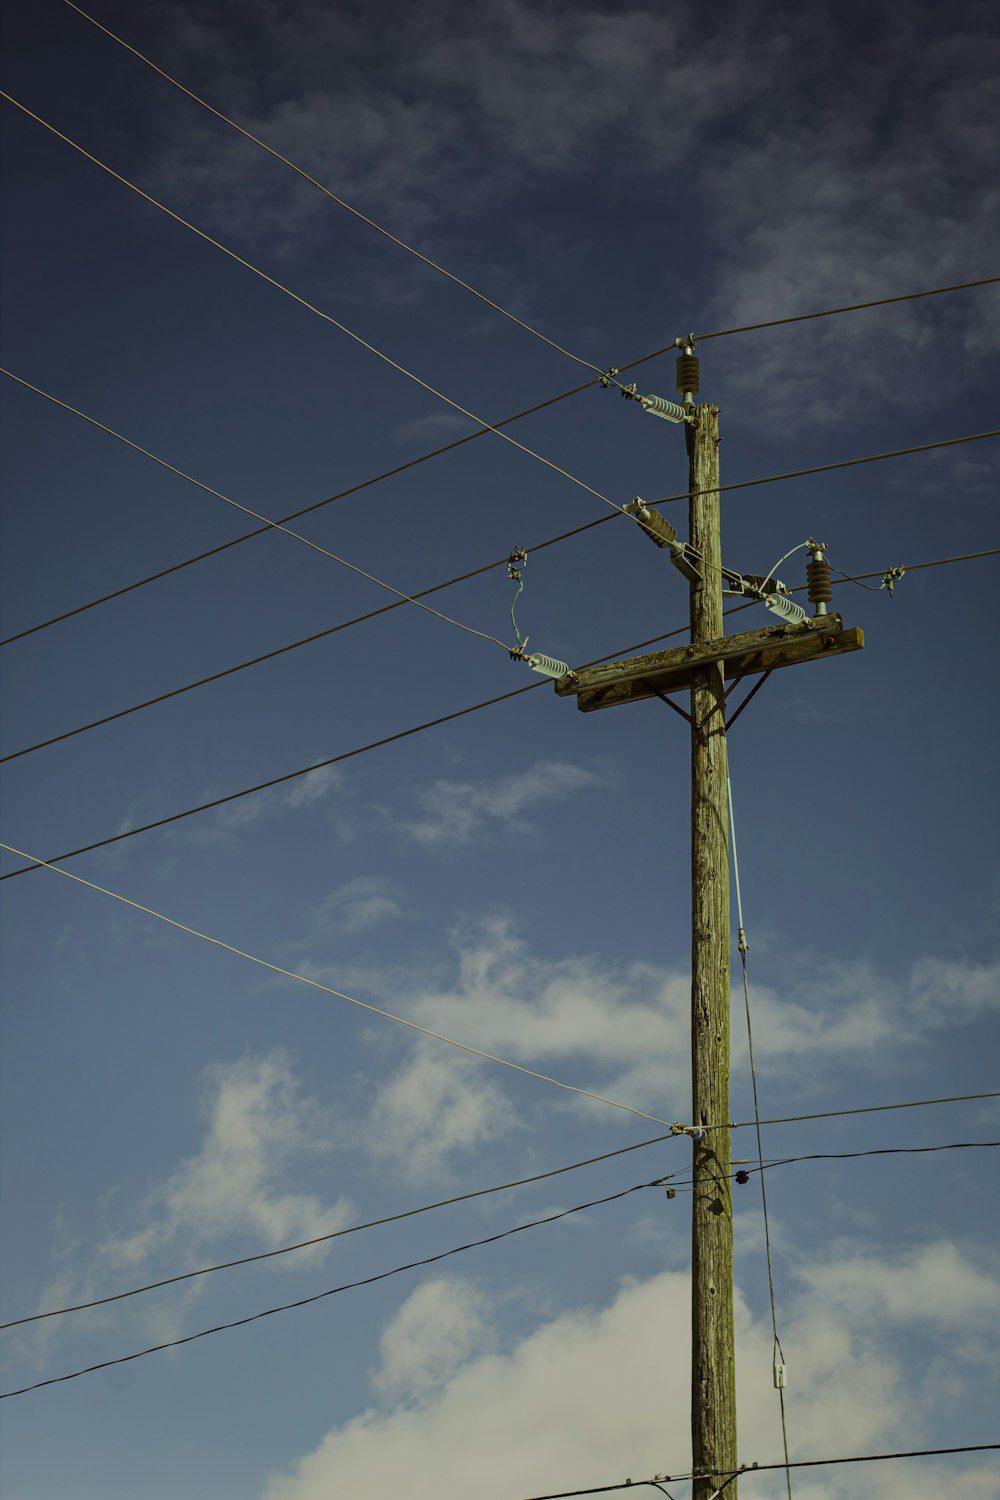 a wooden cross on a pole with power lines in the background